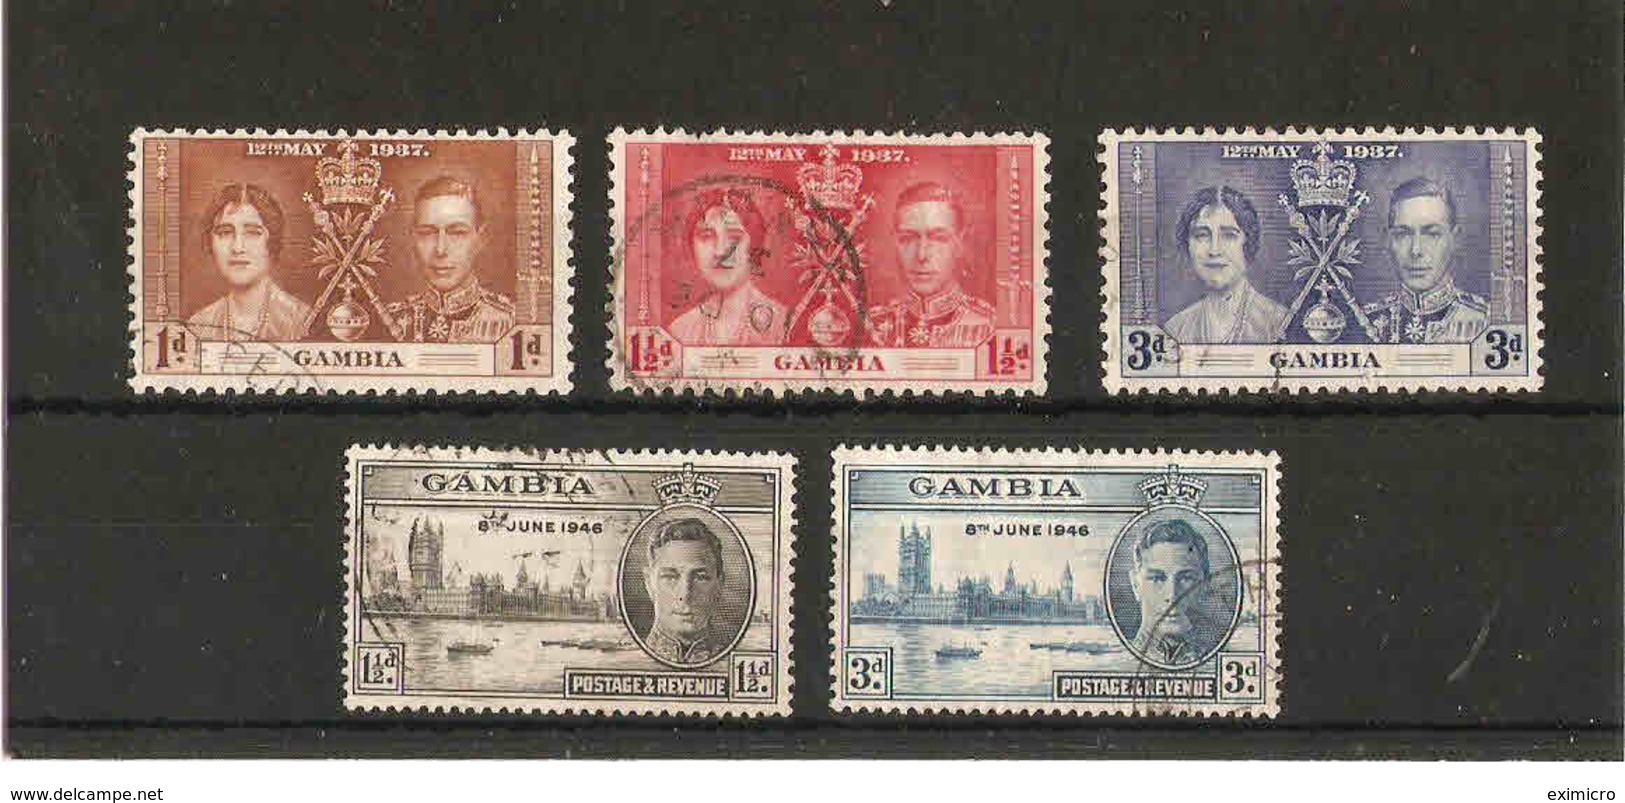 GAMBIA 1937 CORONATION And 1946 VICTORY SETS FINE USED Cat £5.40 - Gambia (...-1964)